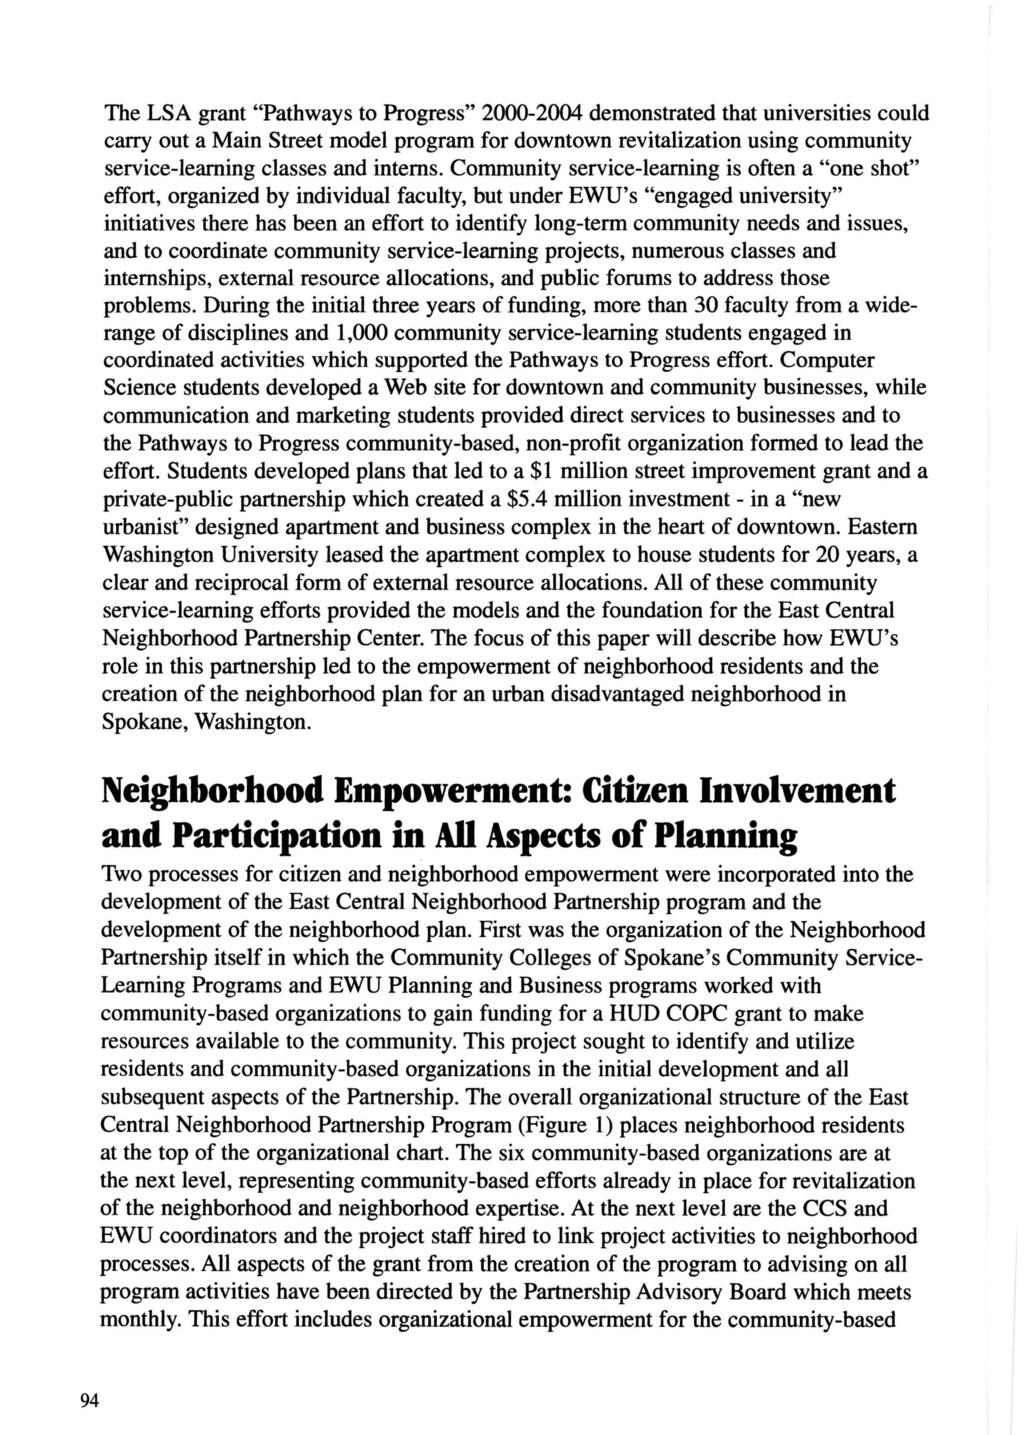 The LSA grant "Pathways to Progress" 2000-2004 demonstrated that universities could carry out a Main Street model program for downtown revitalization using community service-learning classes and